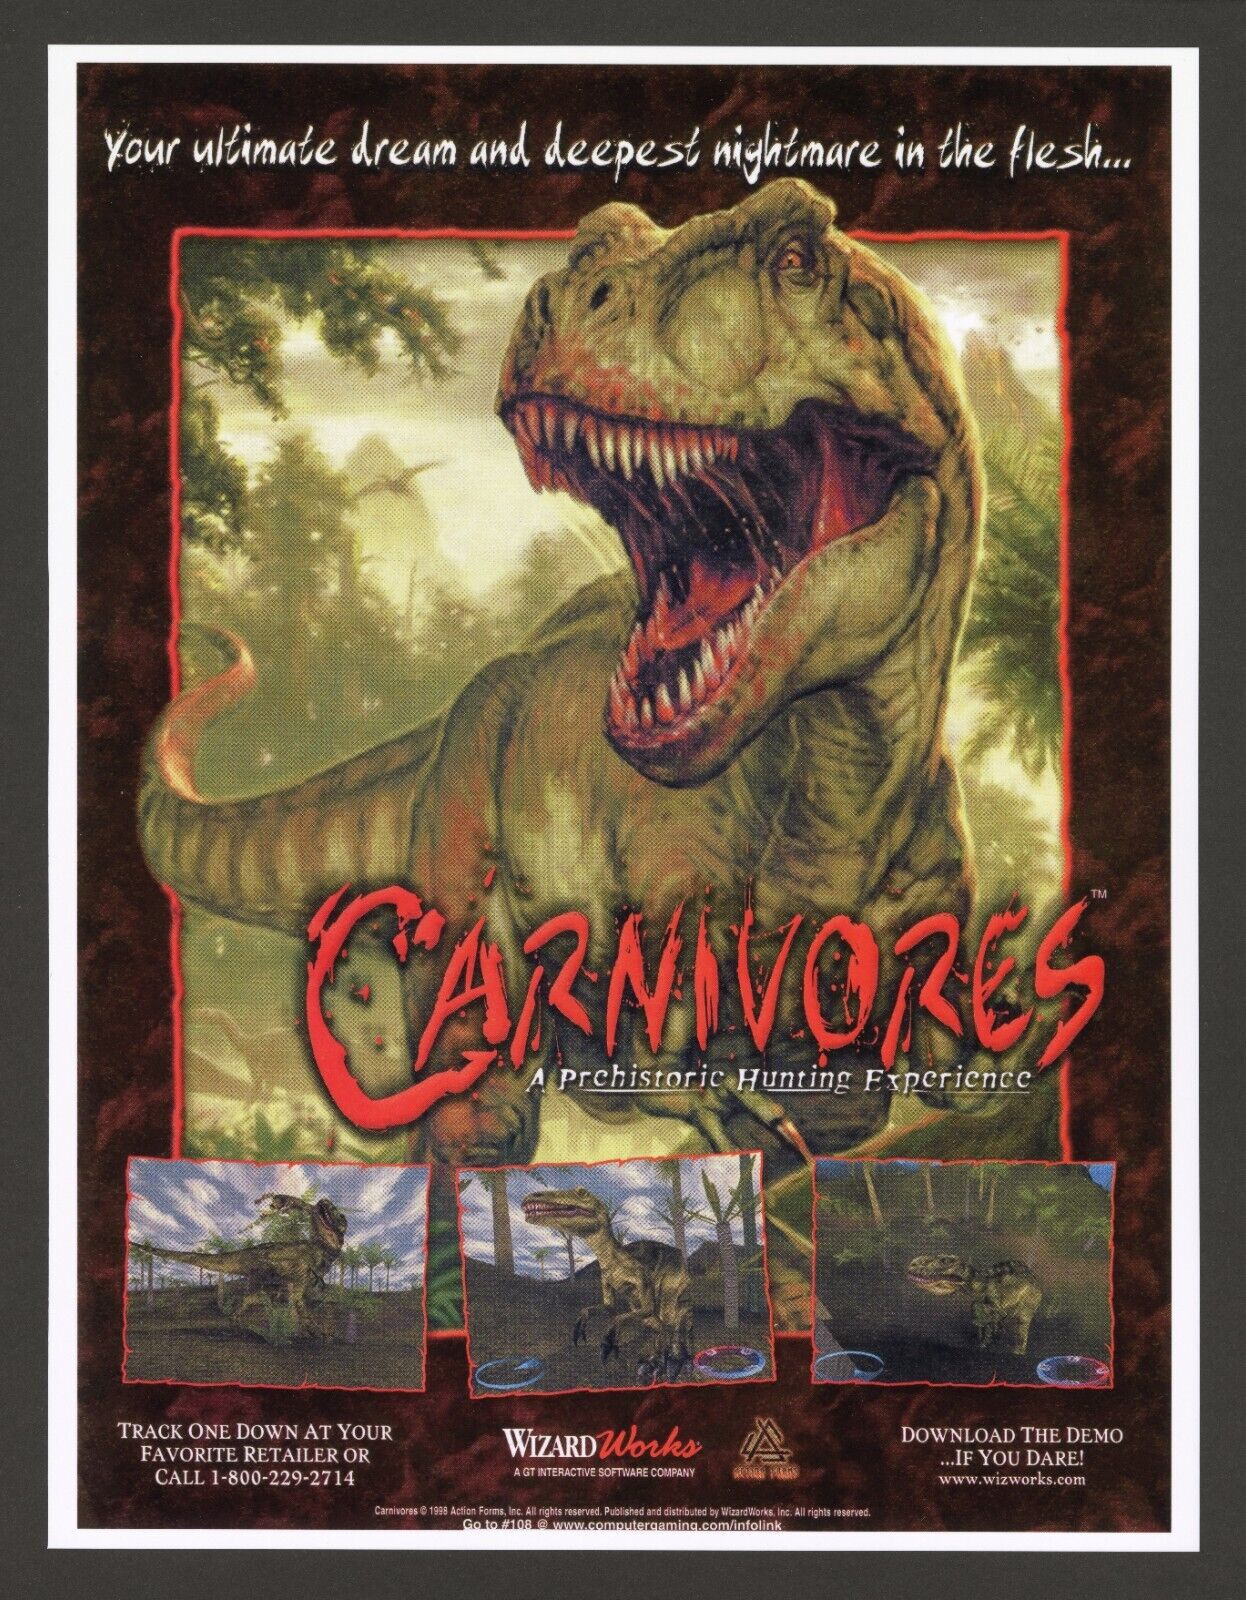 Carnivores PC Game 1998 Vintage Big Box Promotional Ad Art Print Poster - Glossy